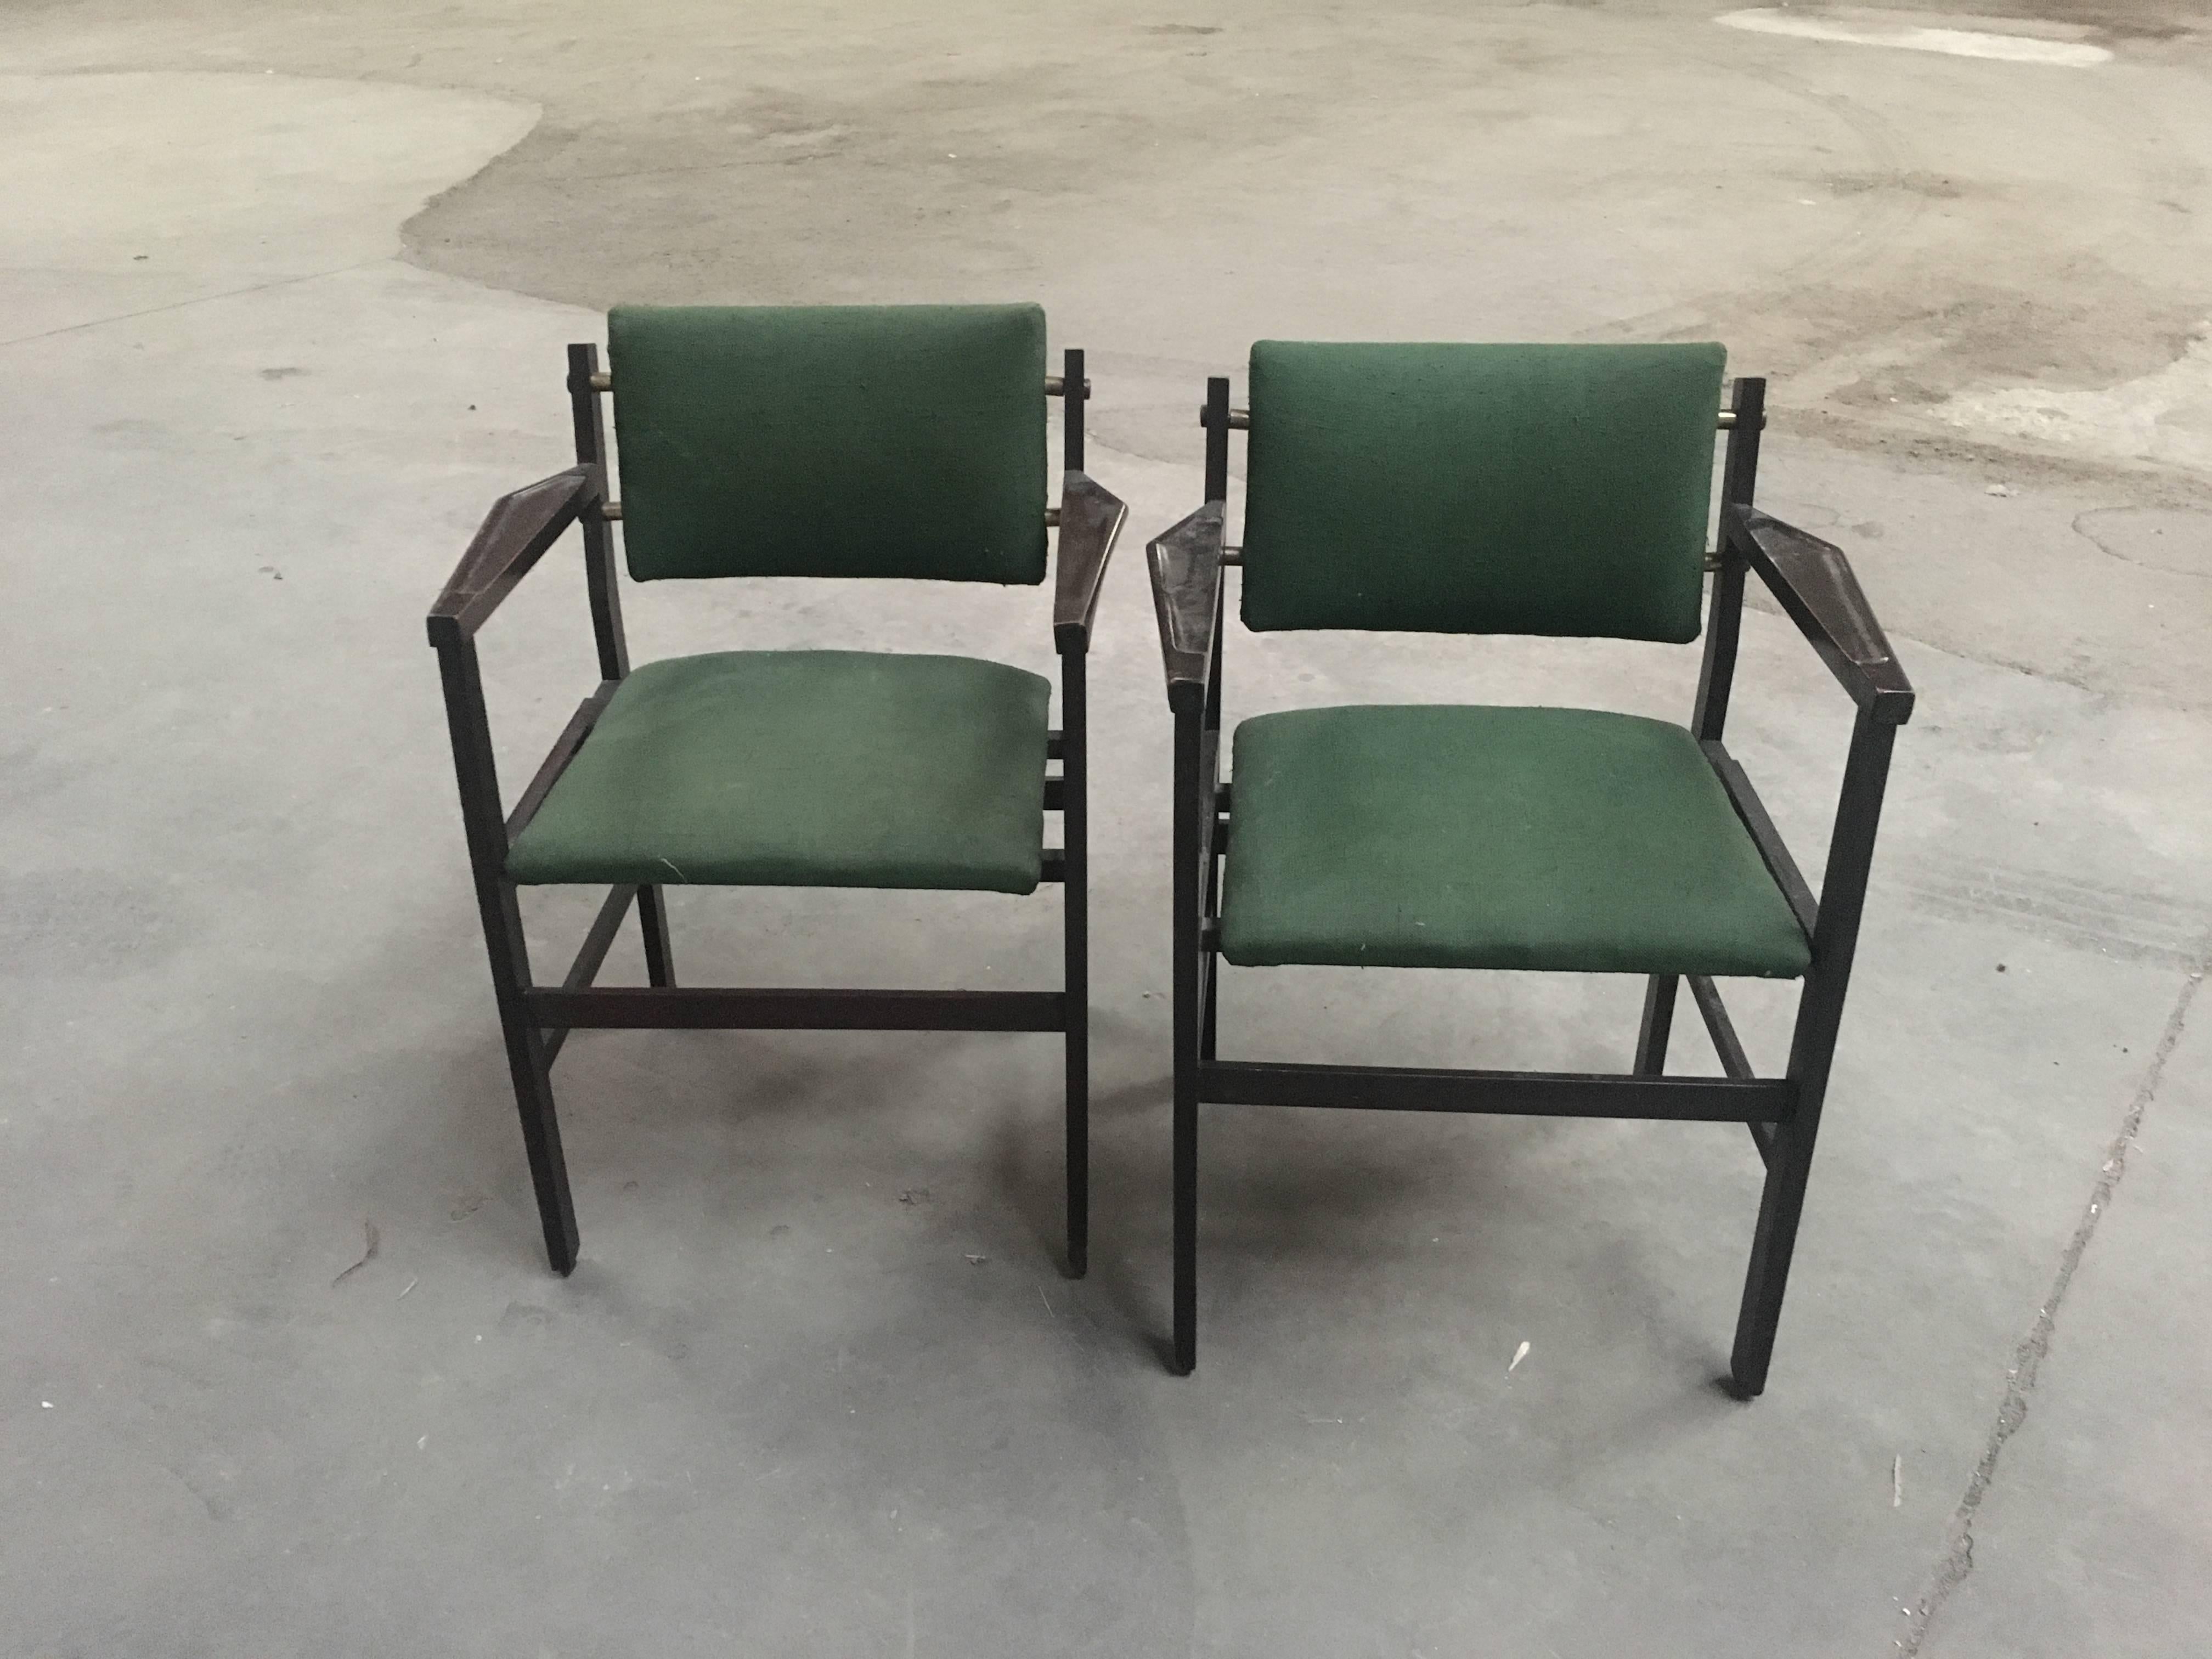 Pair of Italian chairs with original green fabric from 1960s.